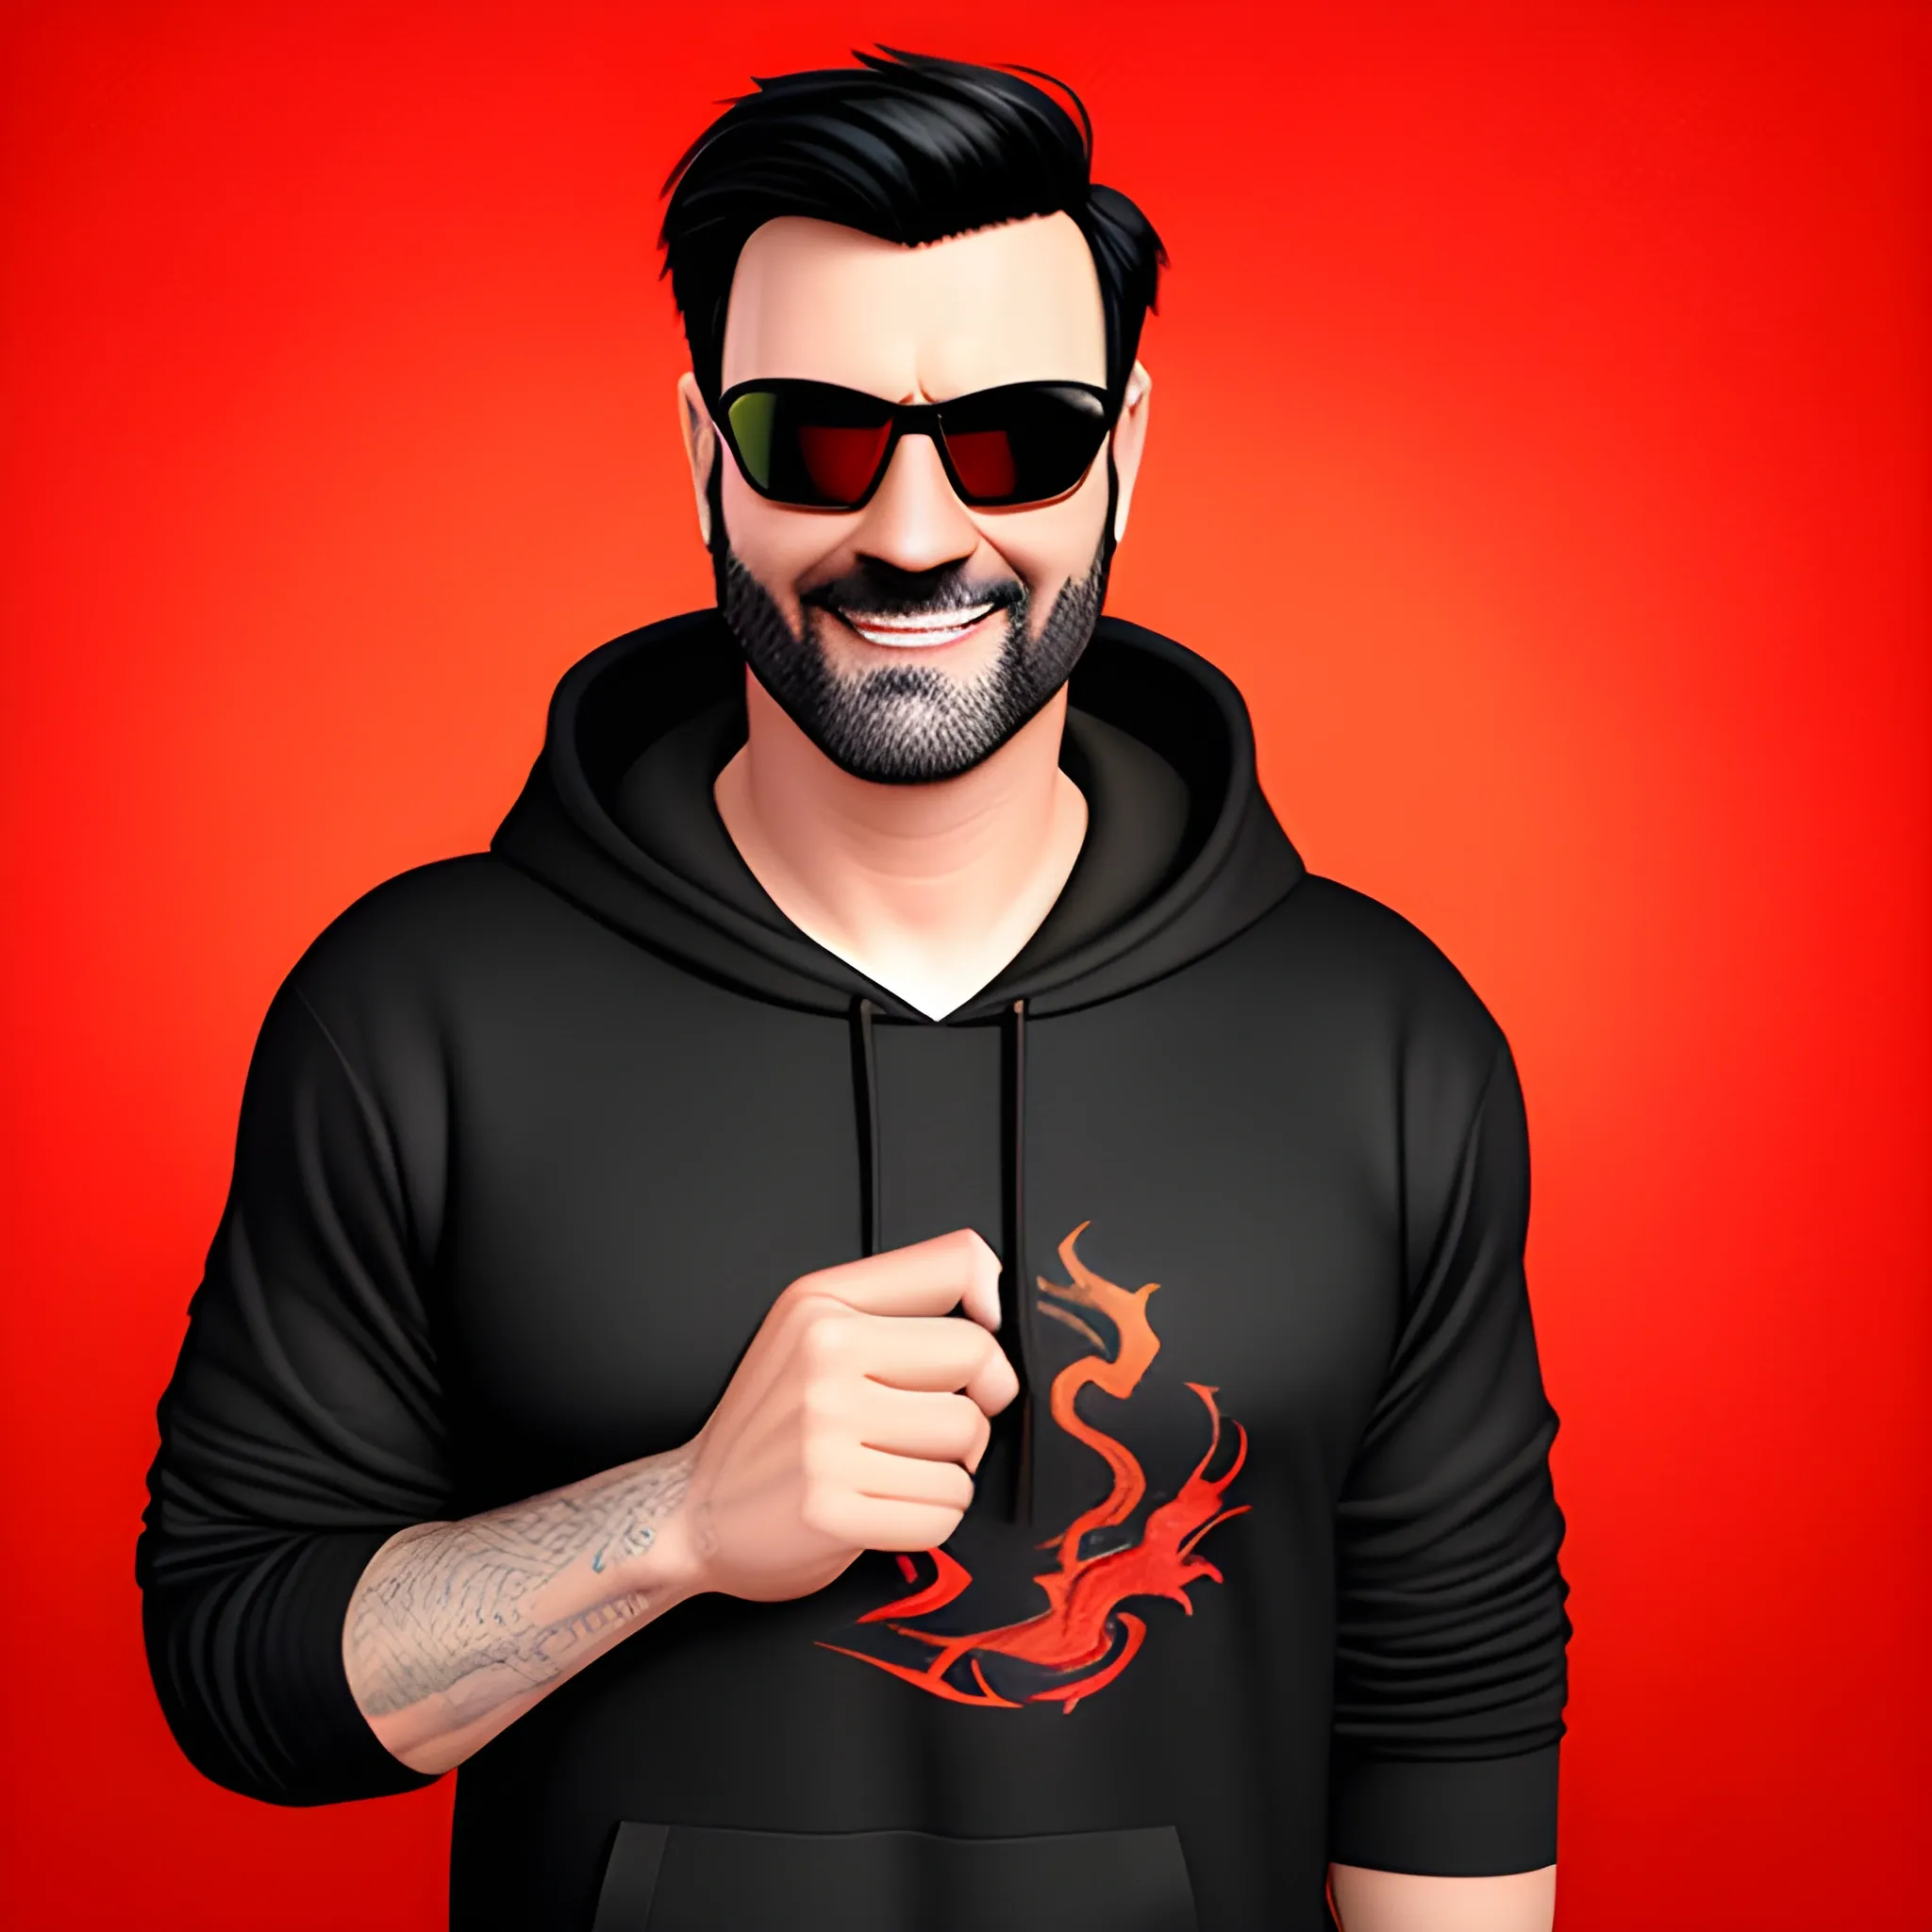 Pixar style headshot of a little boy wearing sunglasses and a hoodie, short black hair playful expression and a dragon print on a red background., 3D